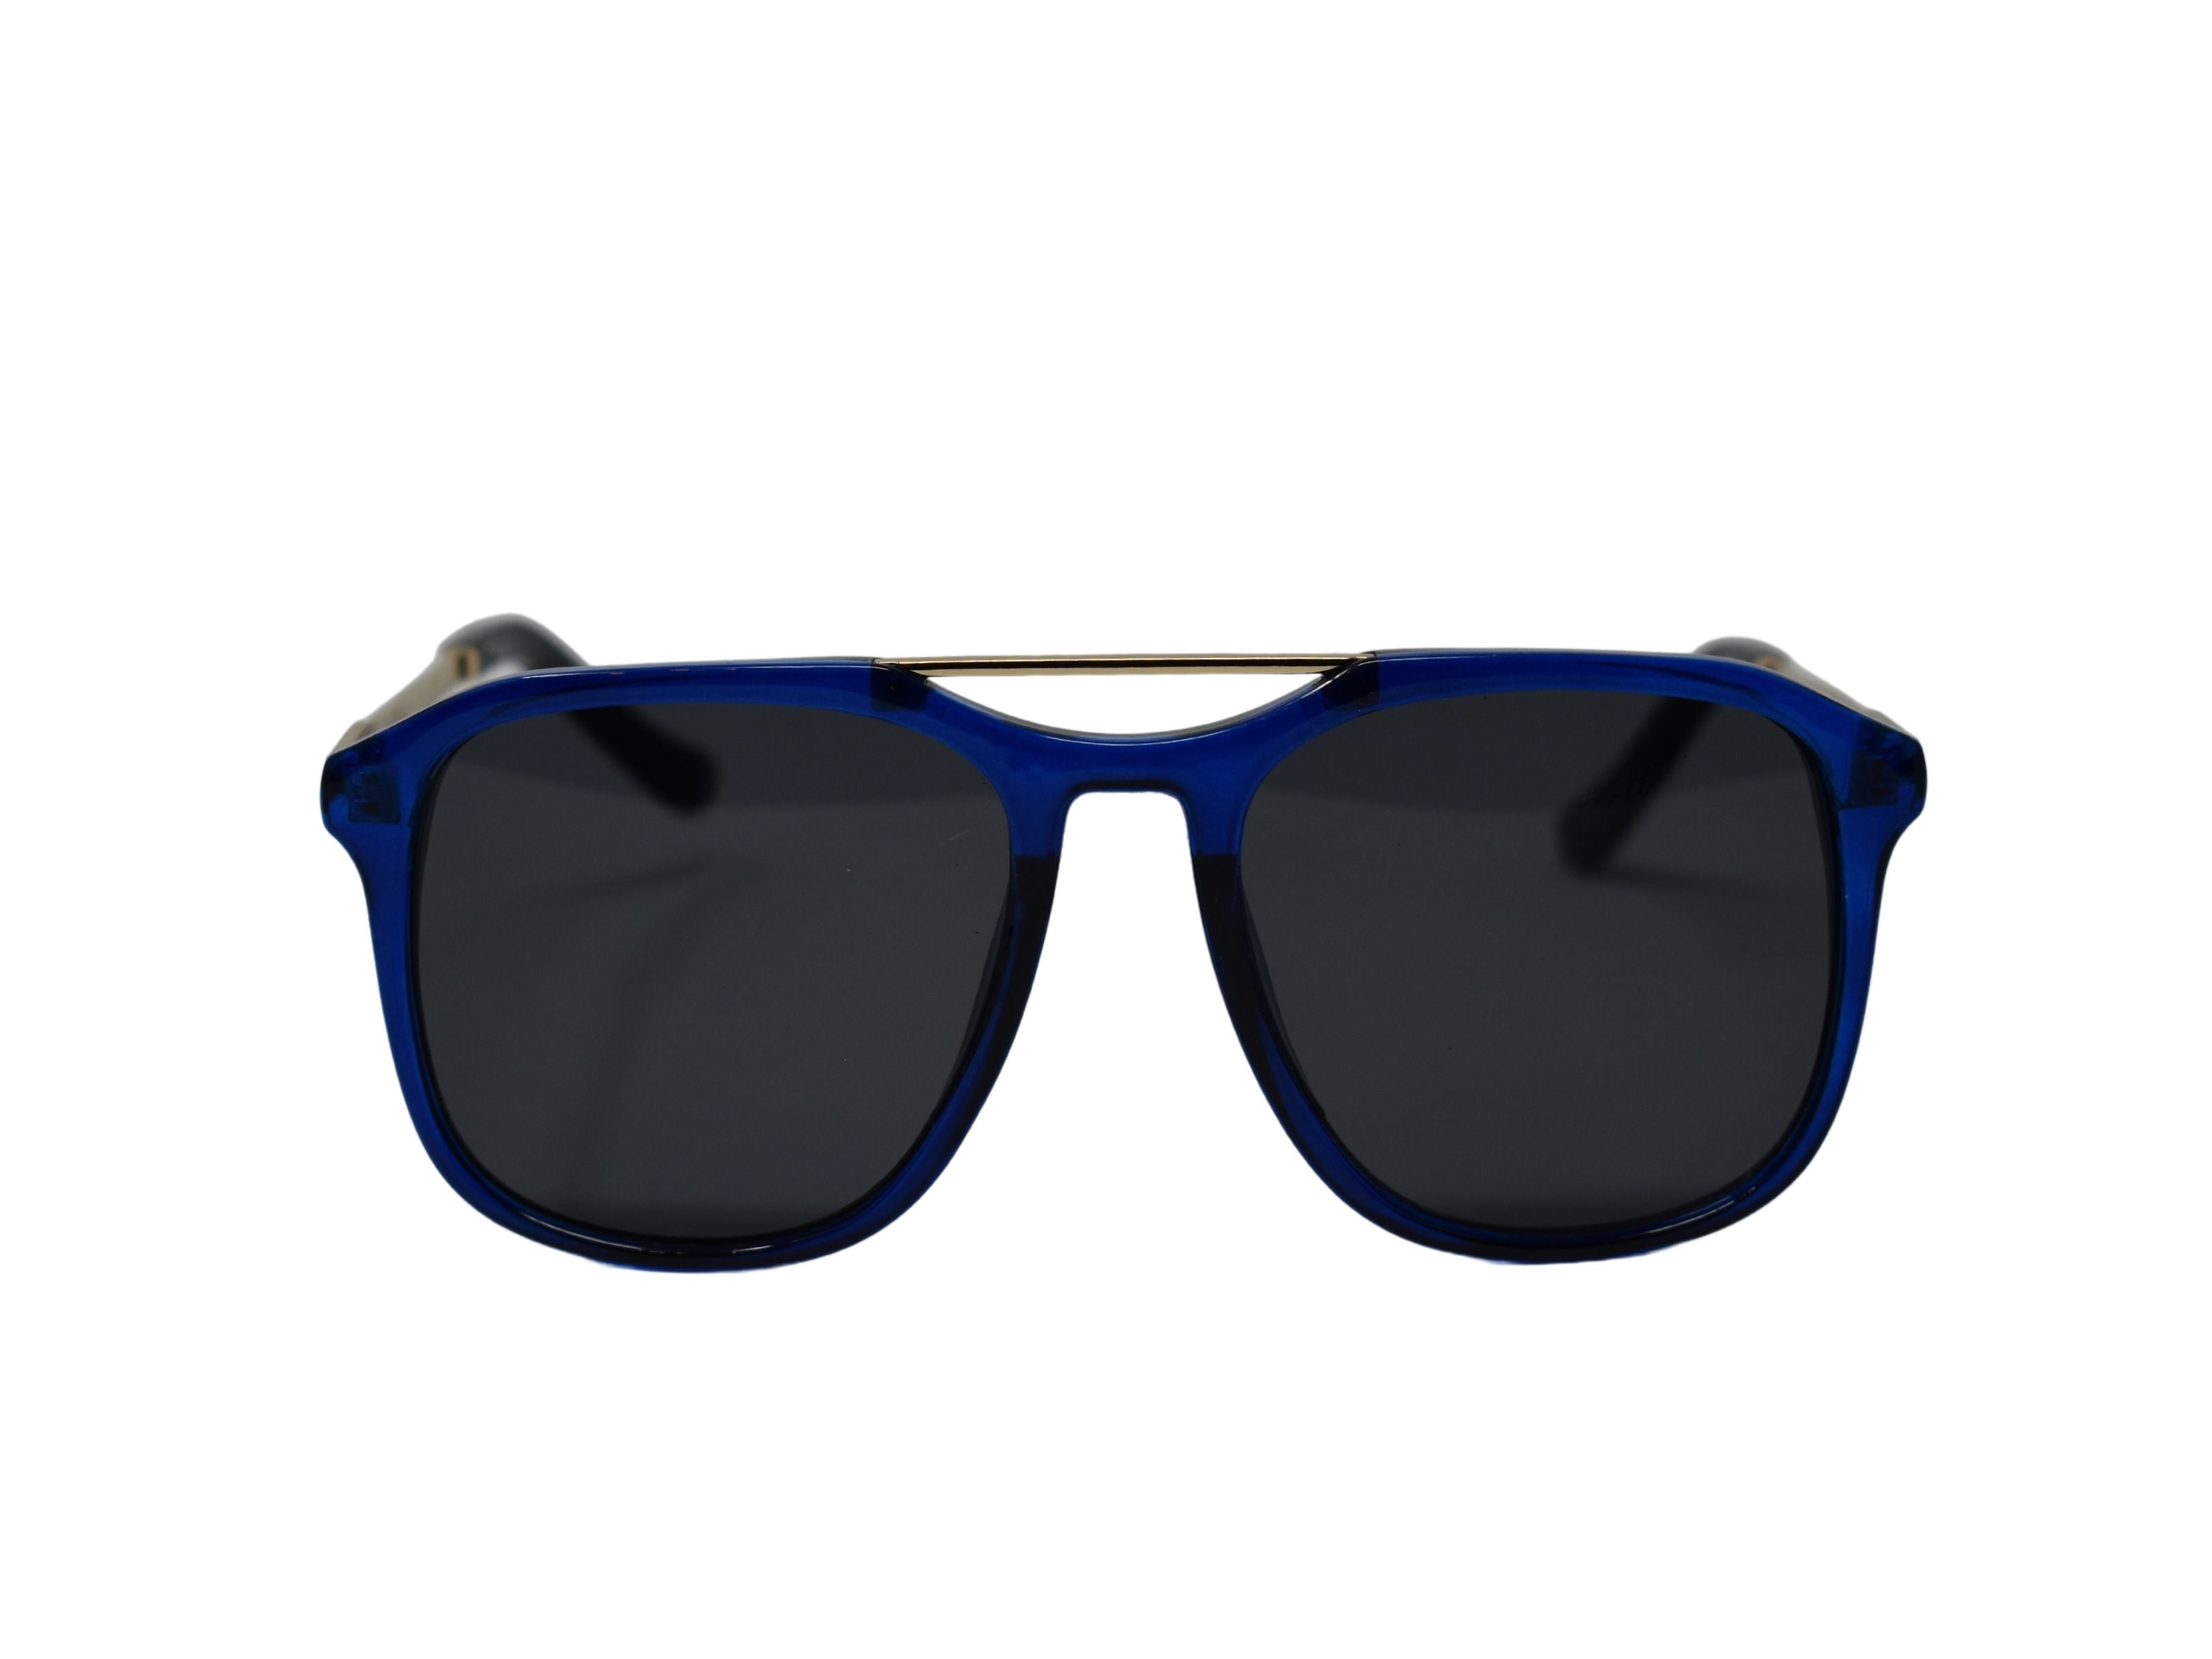 Bring an instant chic appeal with our stylish Breita blue aviator sunglasses.